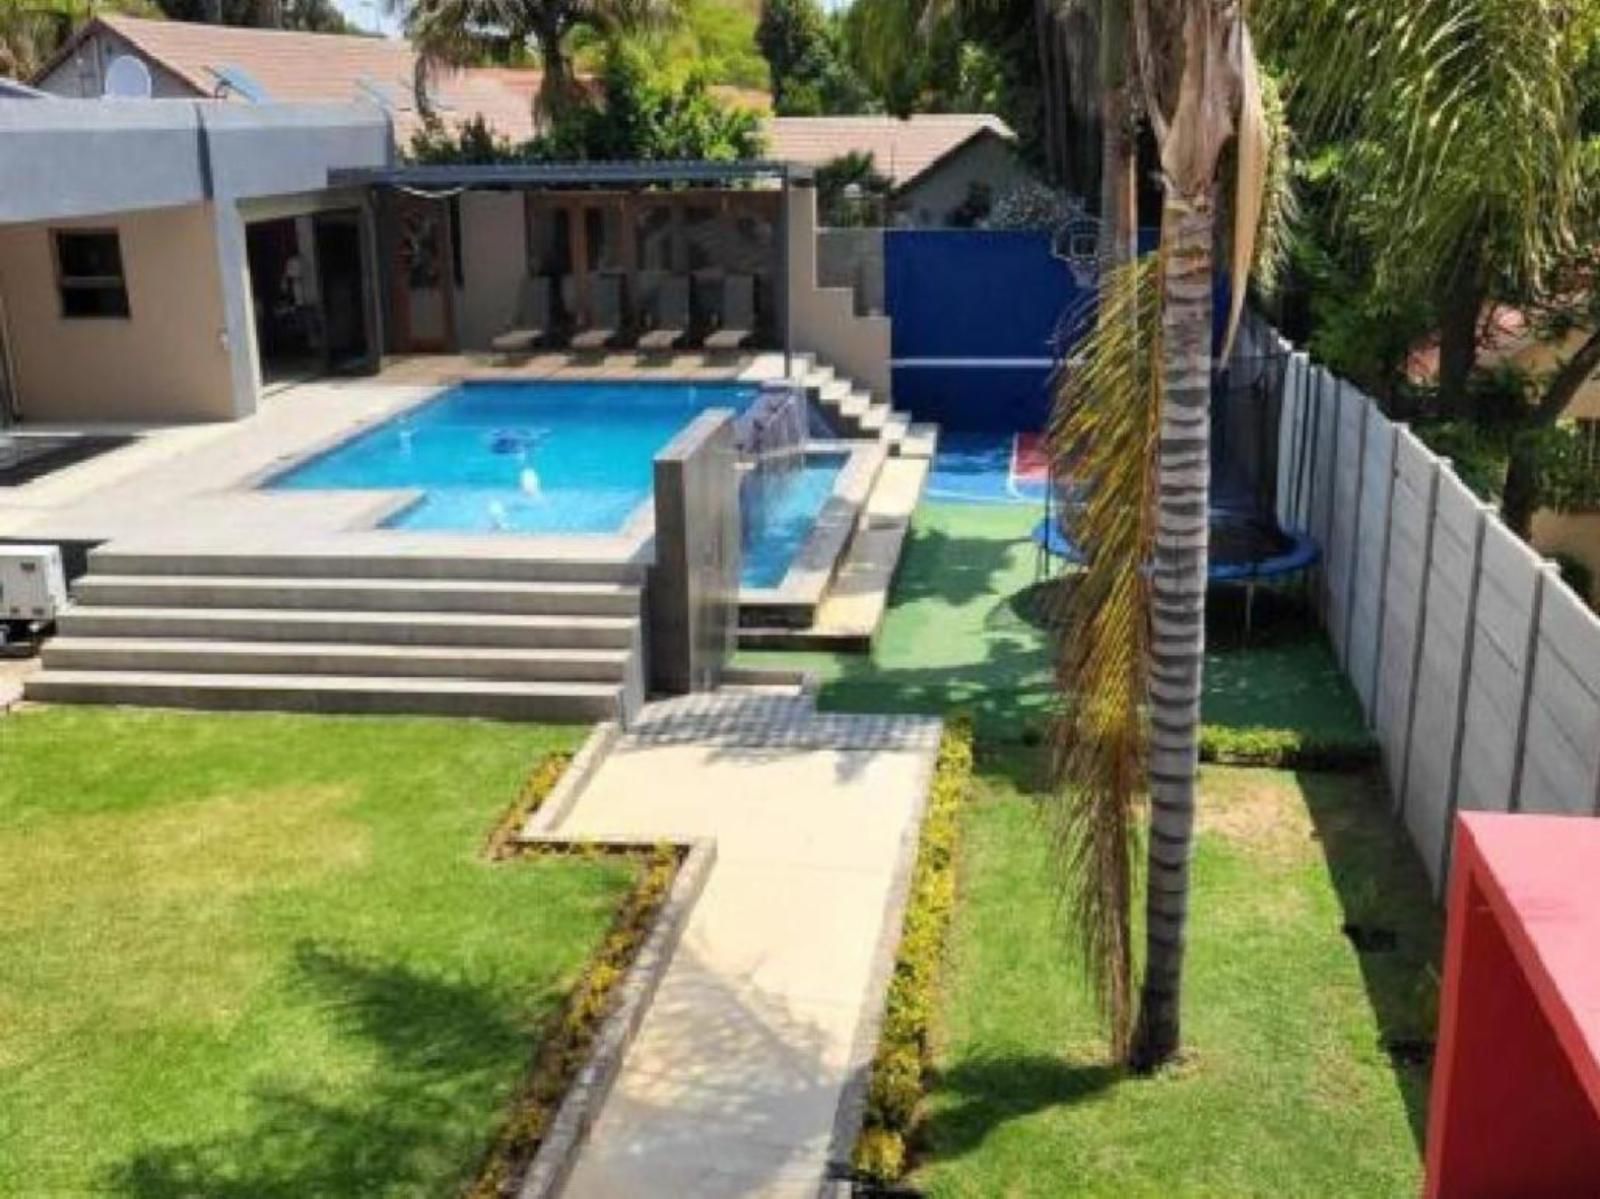 17 On Buffalo Gallo Manor Johannesburg Gauteng South Africa House, Building, Architecture, Palm Tree, Plant, Nature, Wood, Garden, Swimming Pool